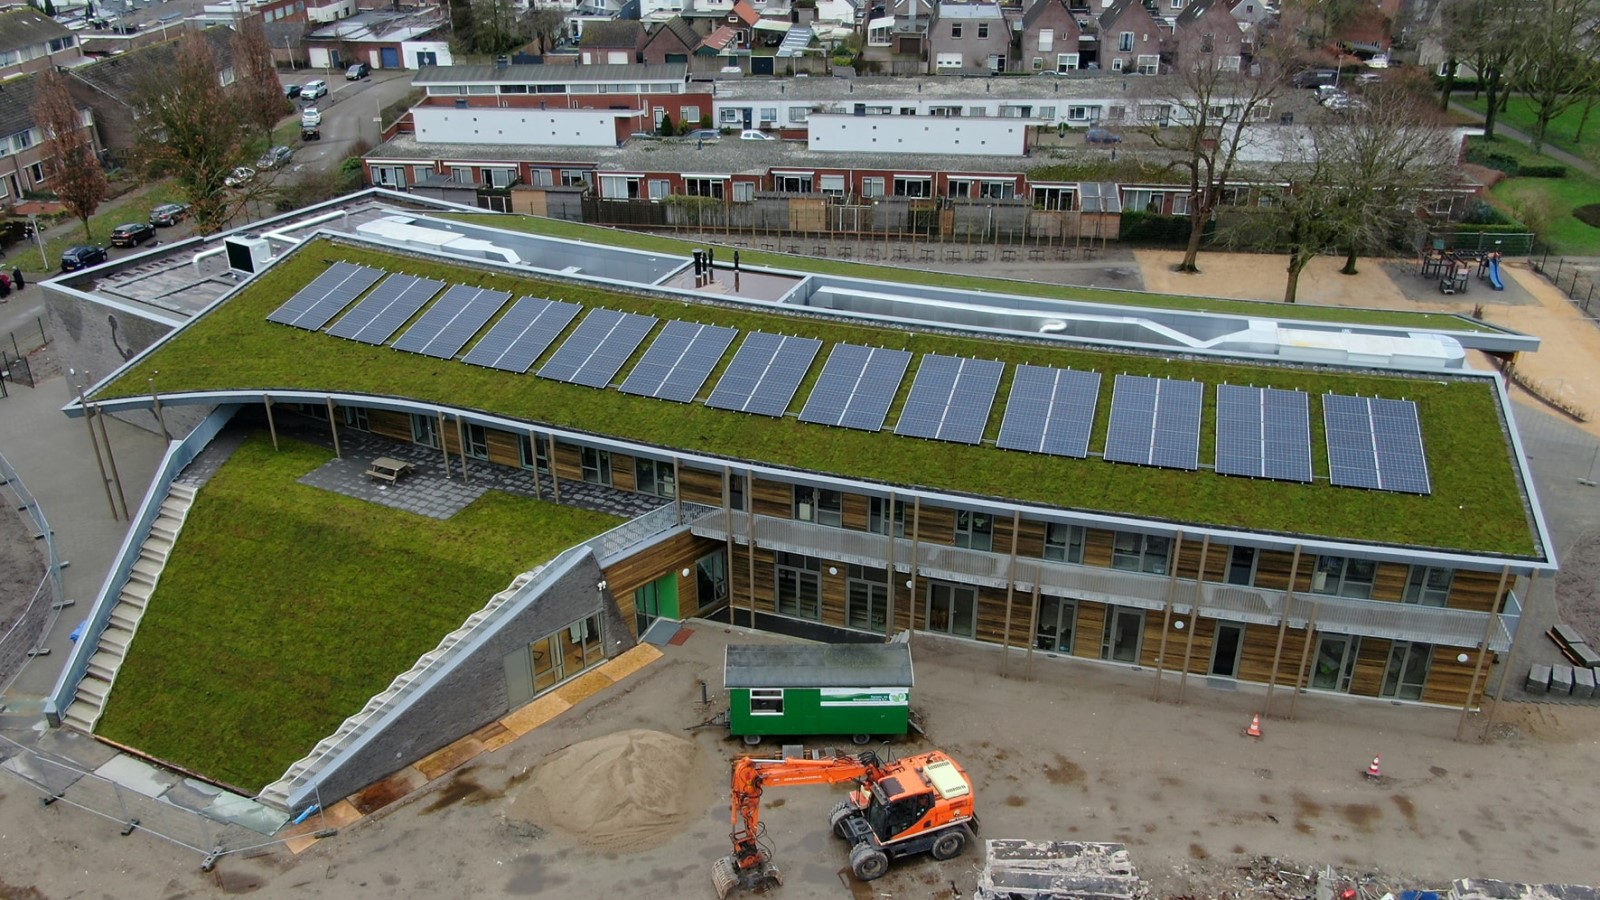 Zanddonk Children's Centre in Waalwijk, the Netherlands uses Sempergreen's complete green roof solutions on both flat and sloping roofs. Photo: Airpro Waalwijk